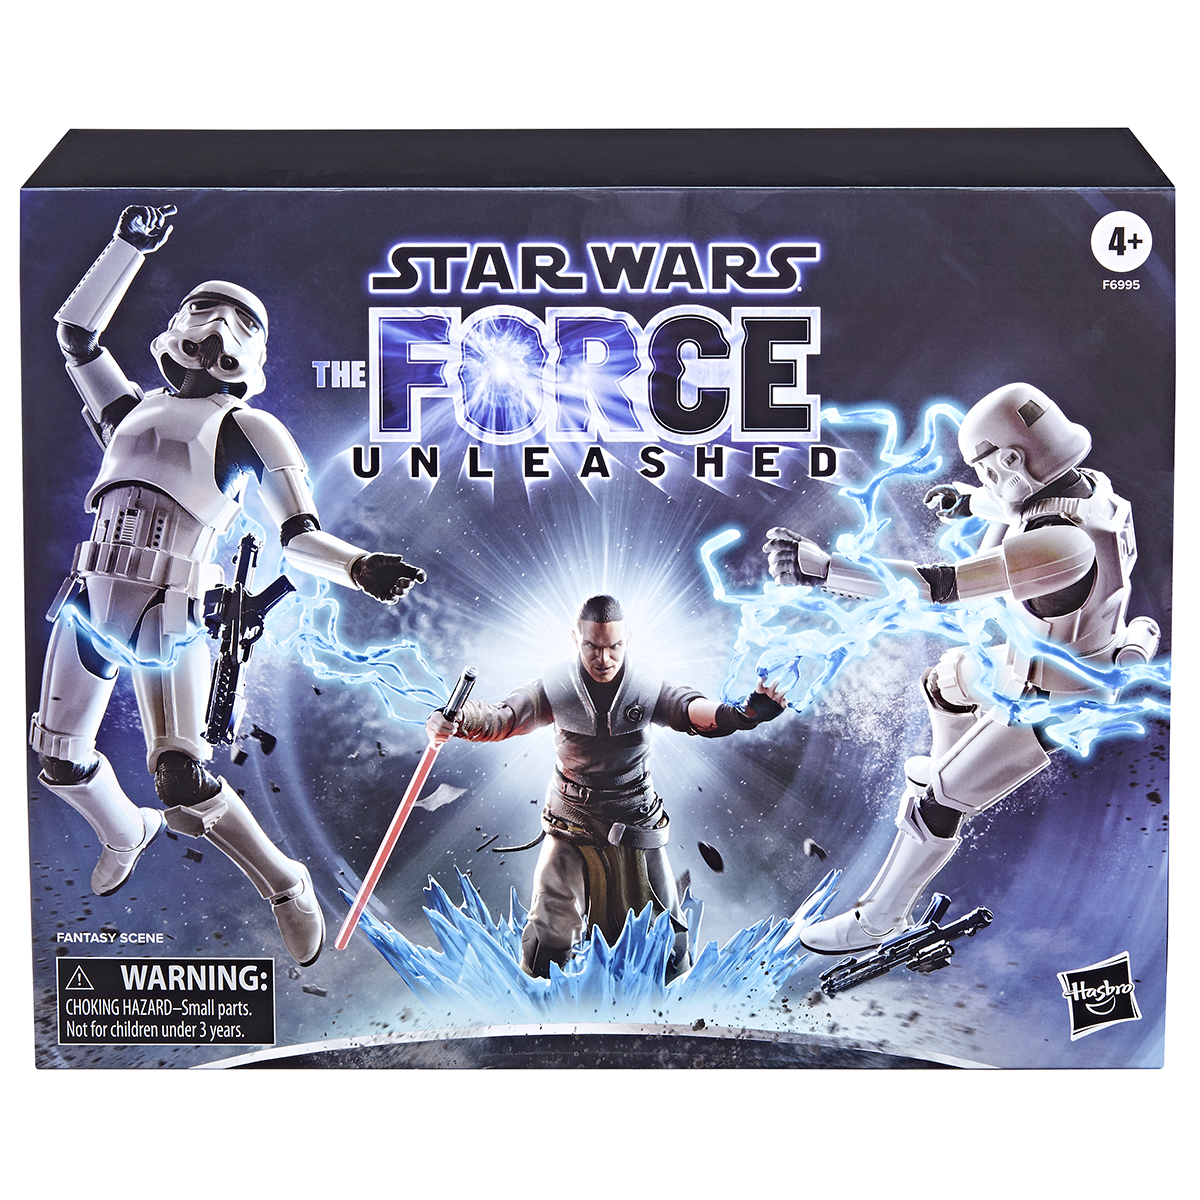 Star Wars The Black Series Force Ghosts 3-Pack – Hasbro Pulse